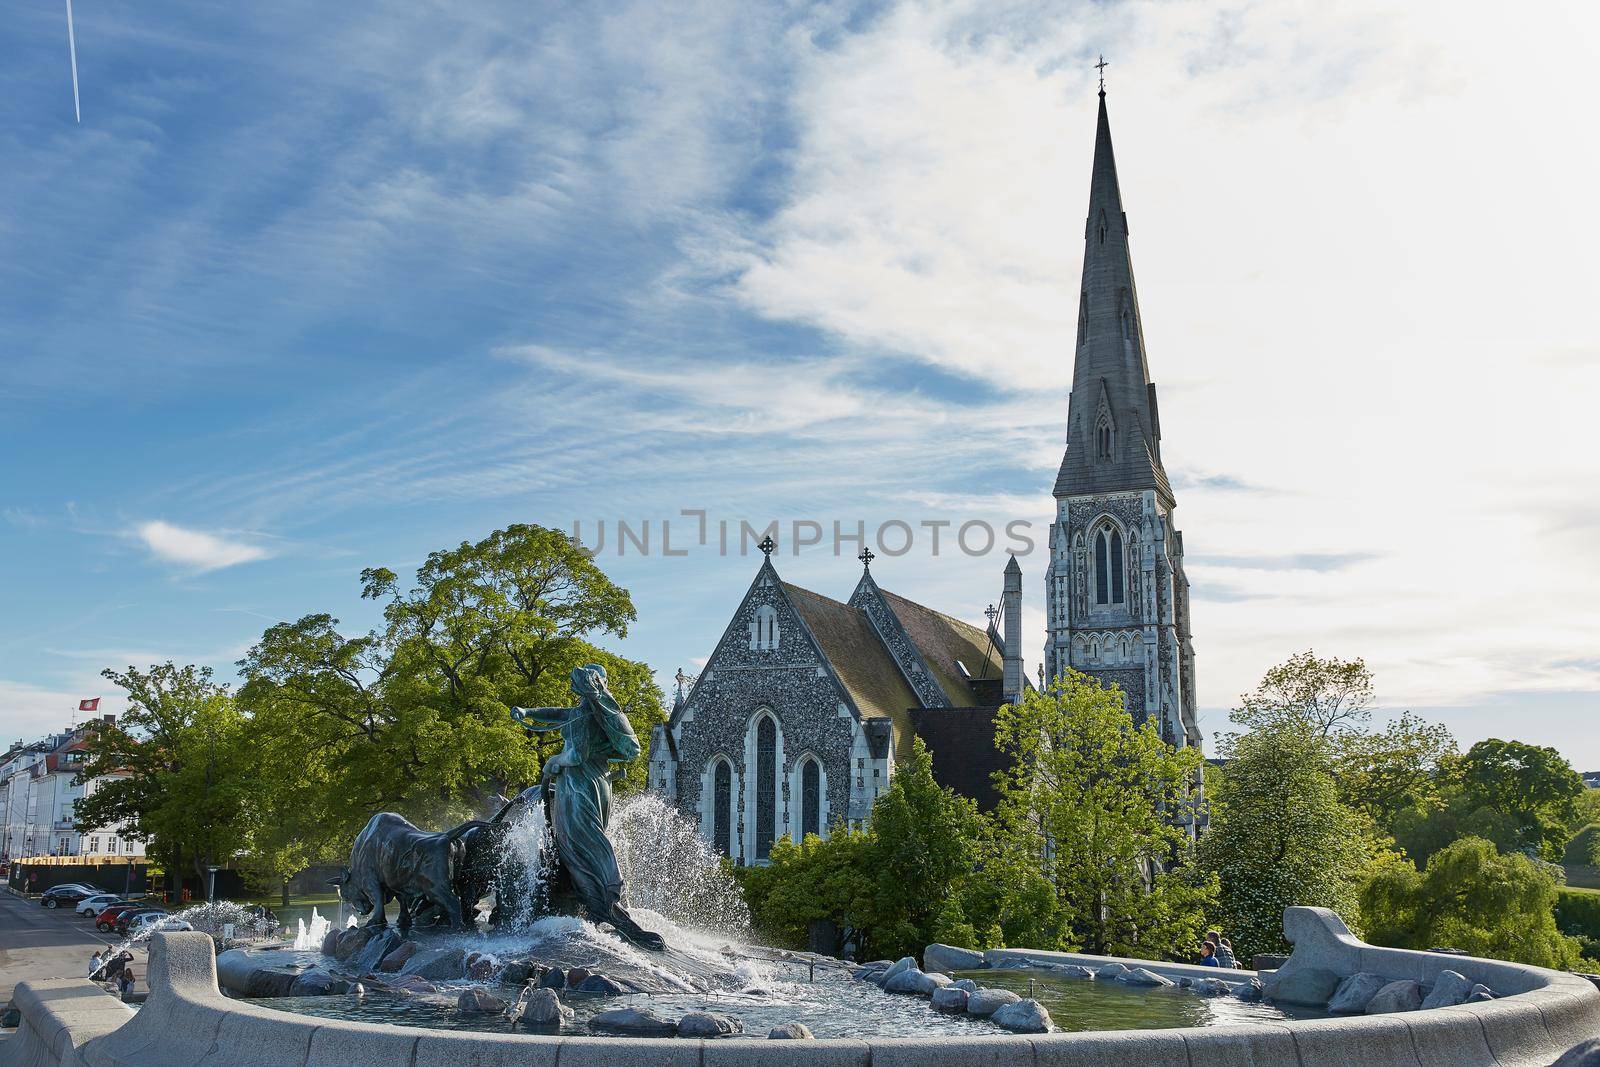 COPENHAGEN, DENMARK - MAY 25, 2017: The Gefion Fountain (Danish: Gefionspringvandet) on the harbor front. It features oxen being driven by the Norse goddess Gefjon. St Alban's Church in the background.